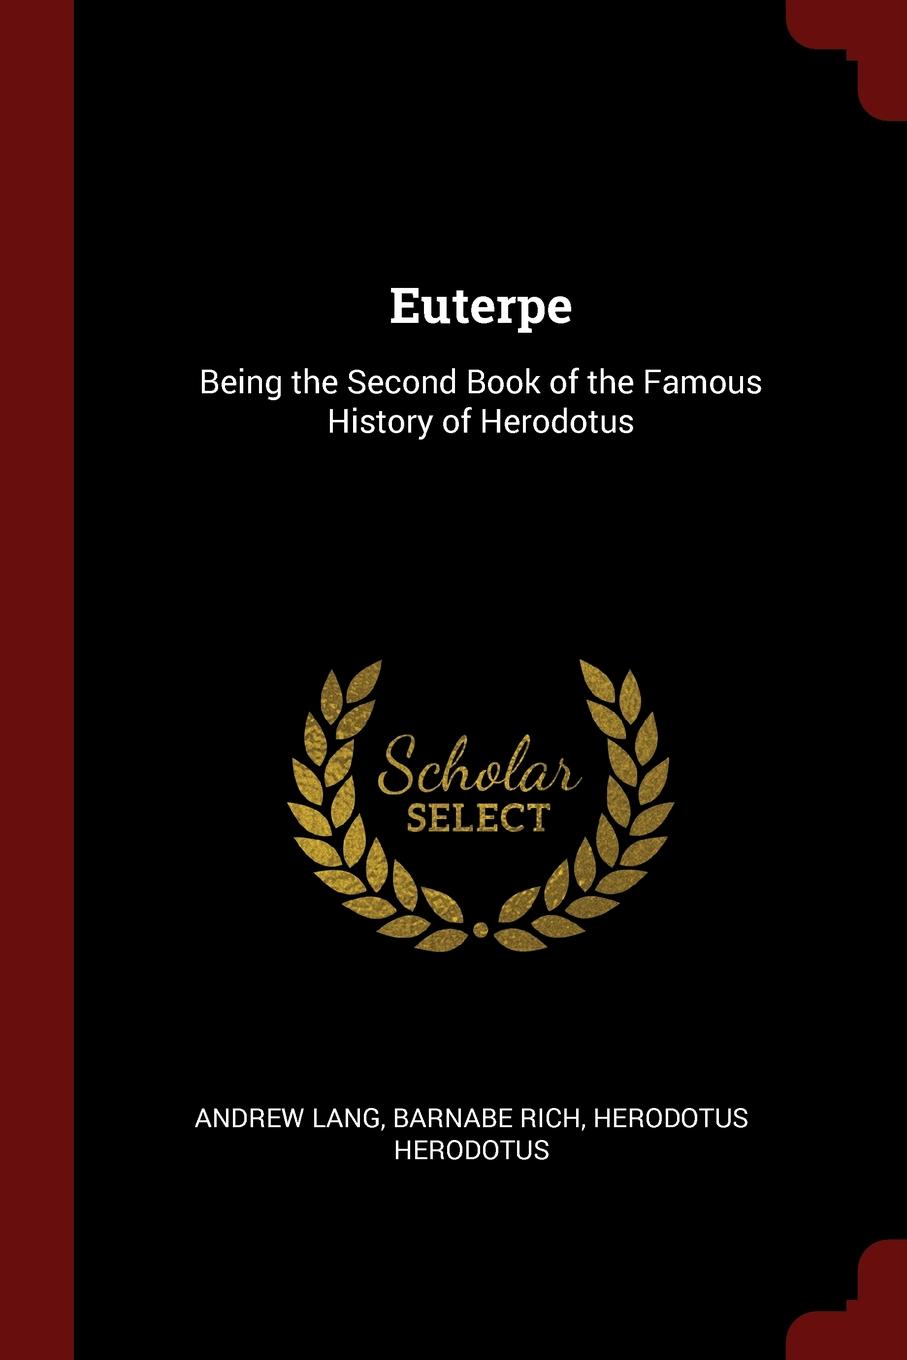 Euterpe. Being the Second Book of the Famous History of Herodotus